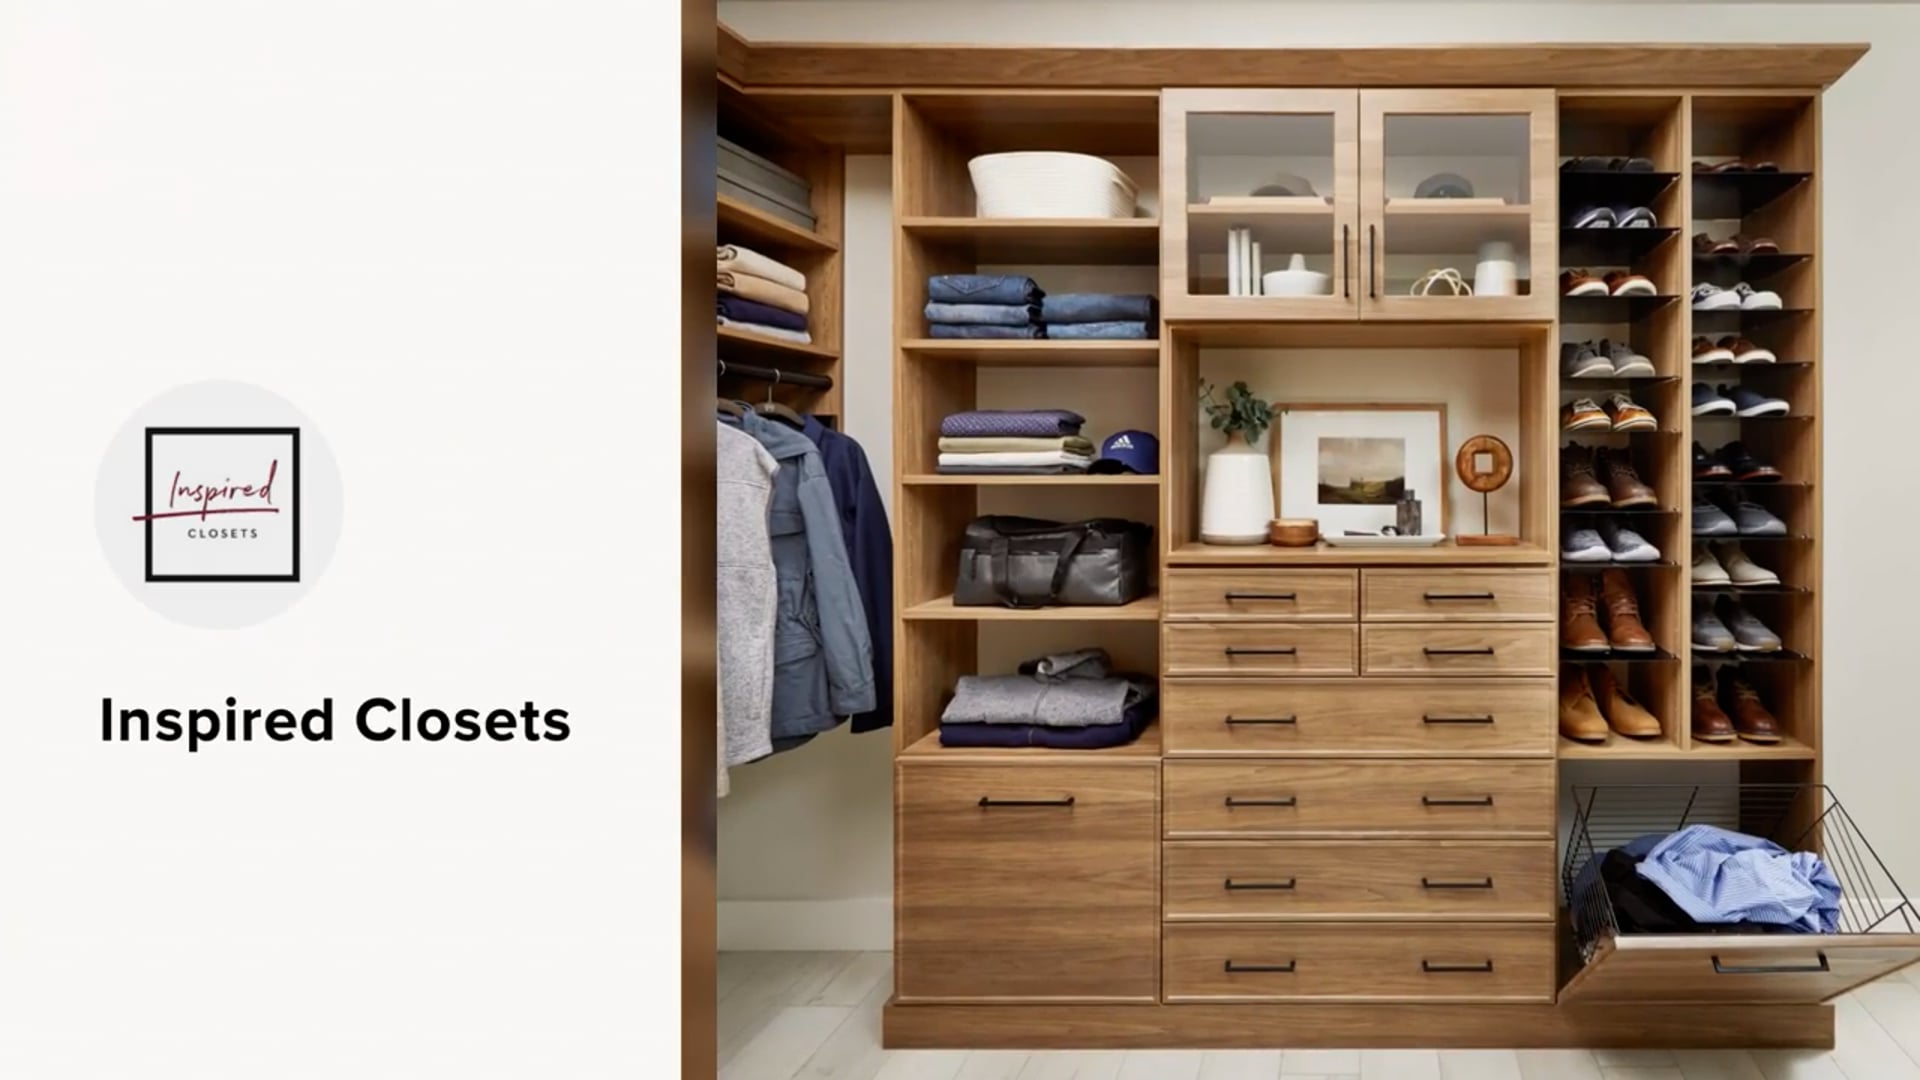 5 expert tips from local designers to maximize your closet space